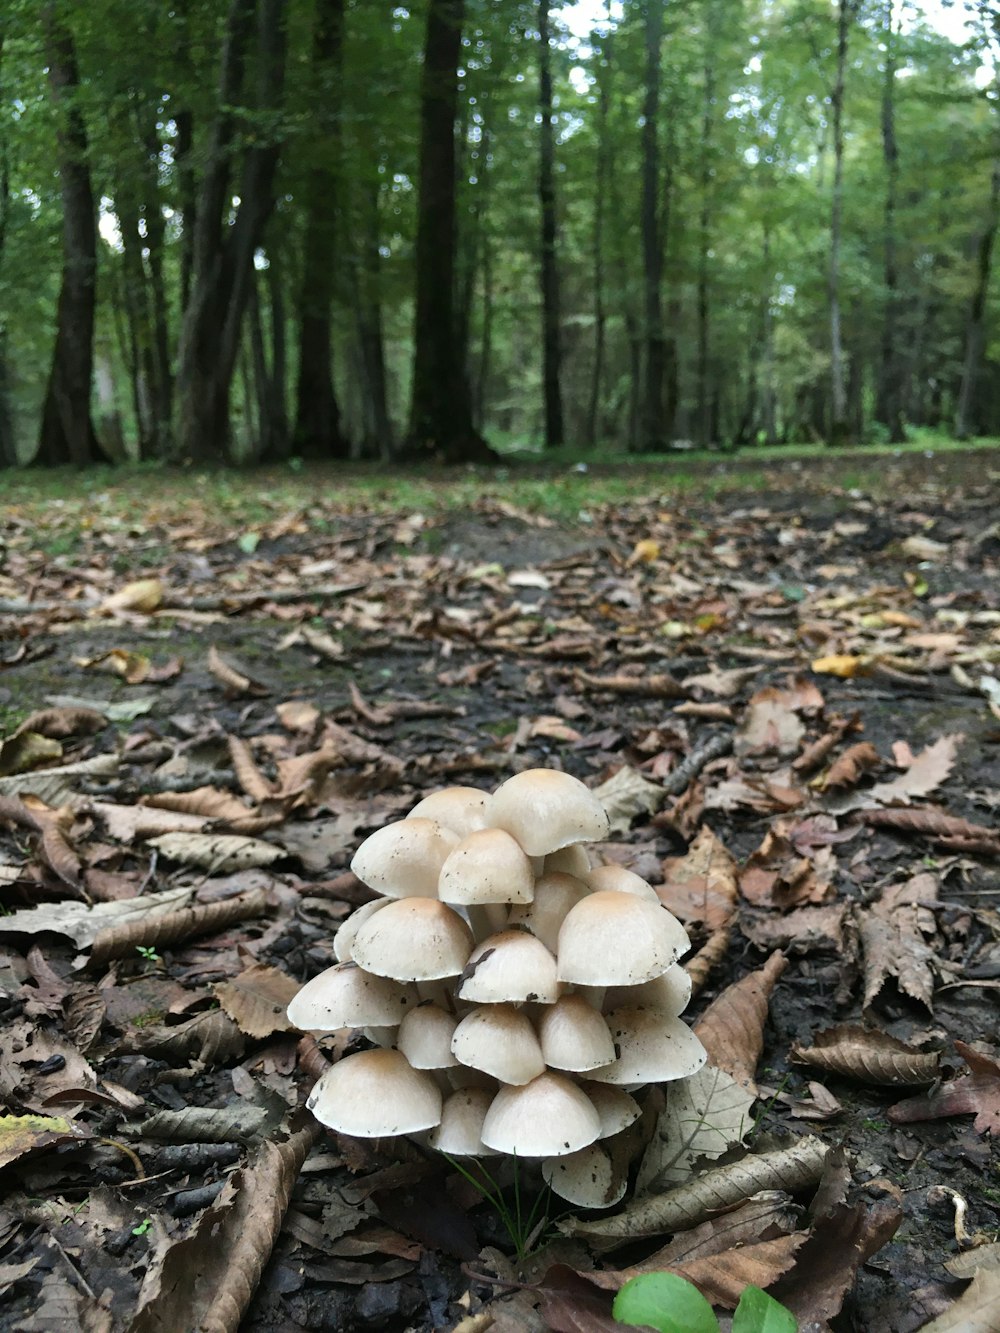 a group of mushrooms in a forest